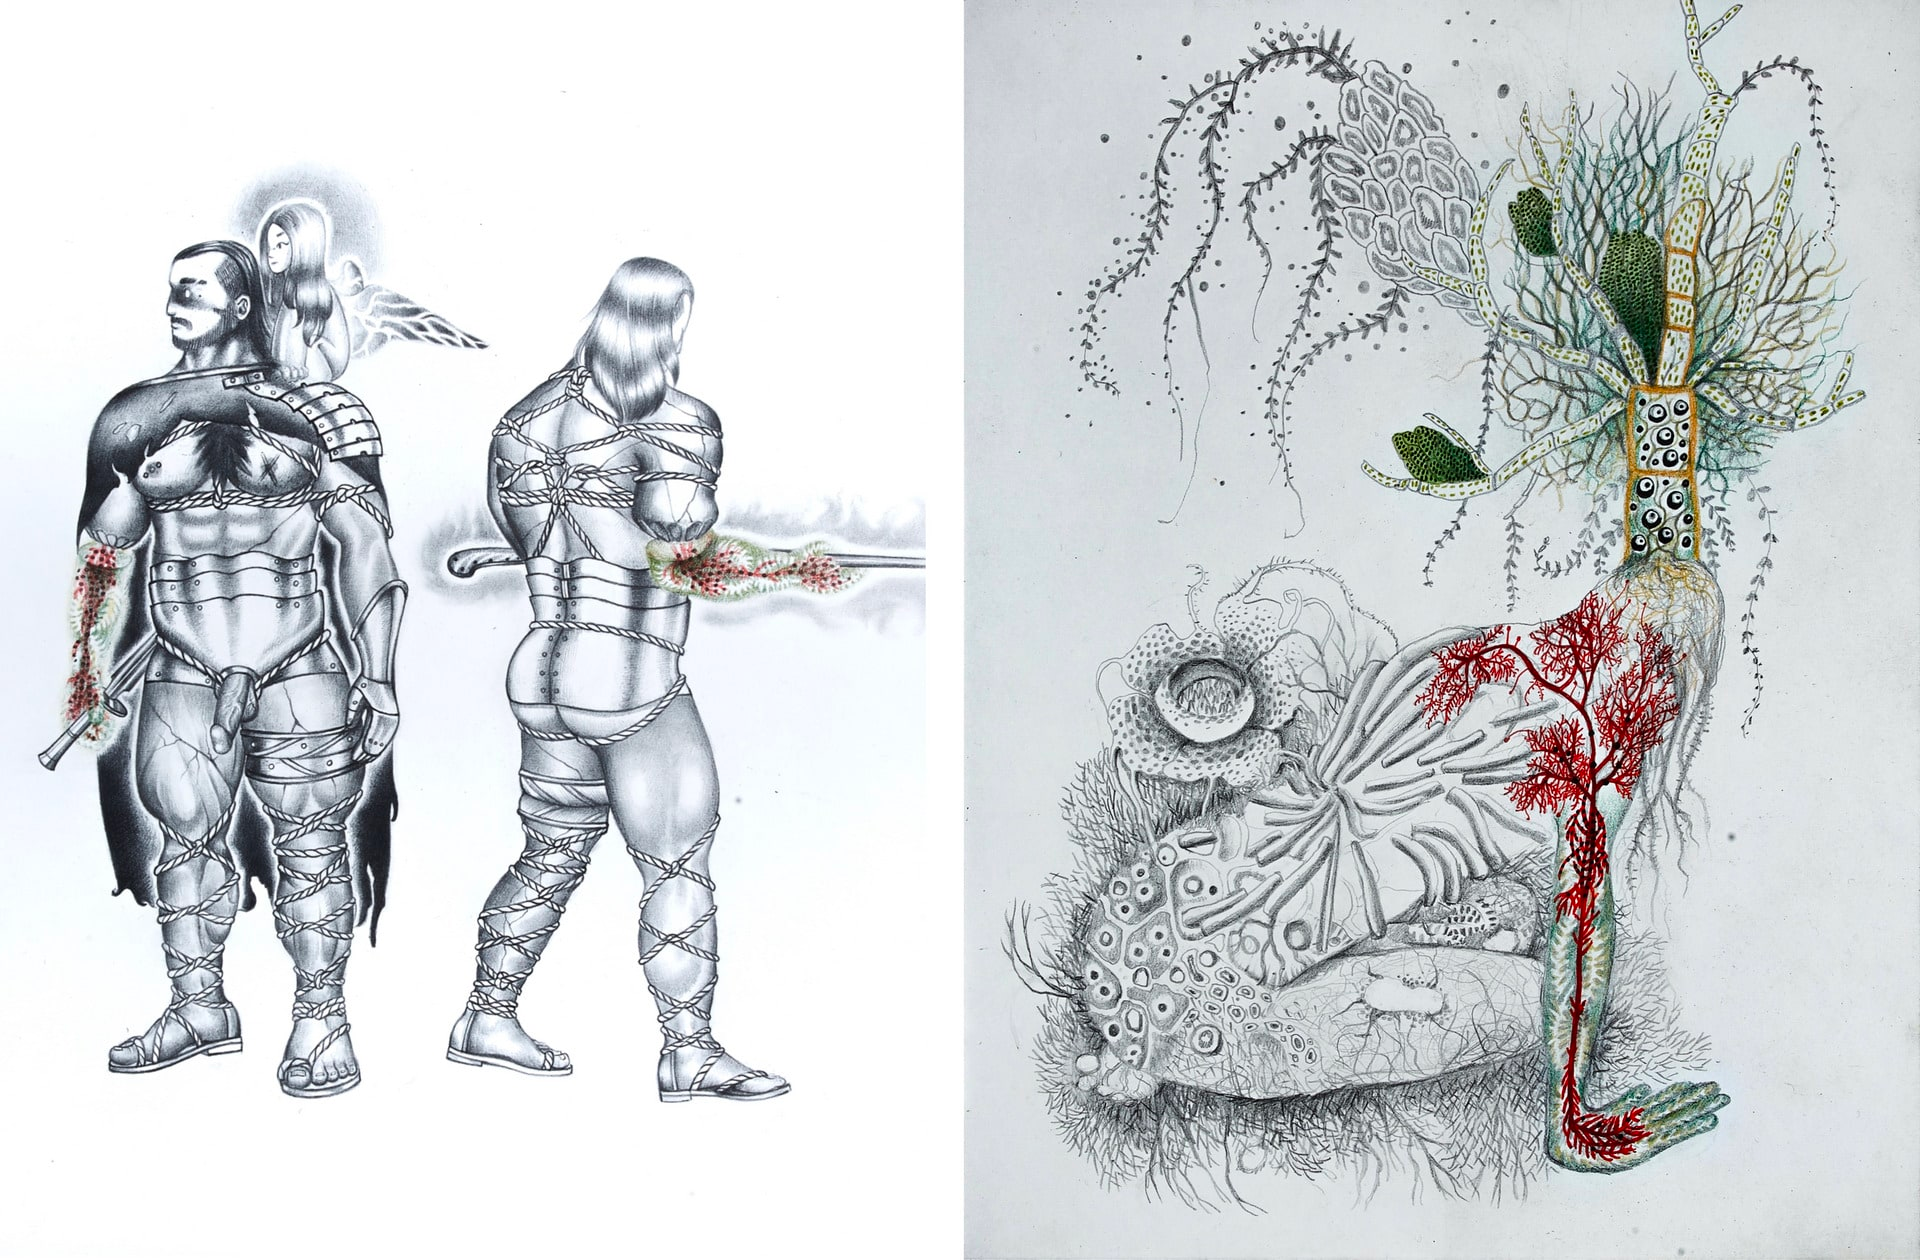 Two images side by side. One of two men in body armour and capes and the other of a woman kneeling on the ground, facing away, with fantastical plants growing within and from her.